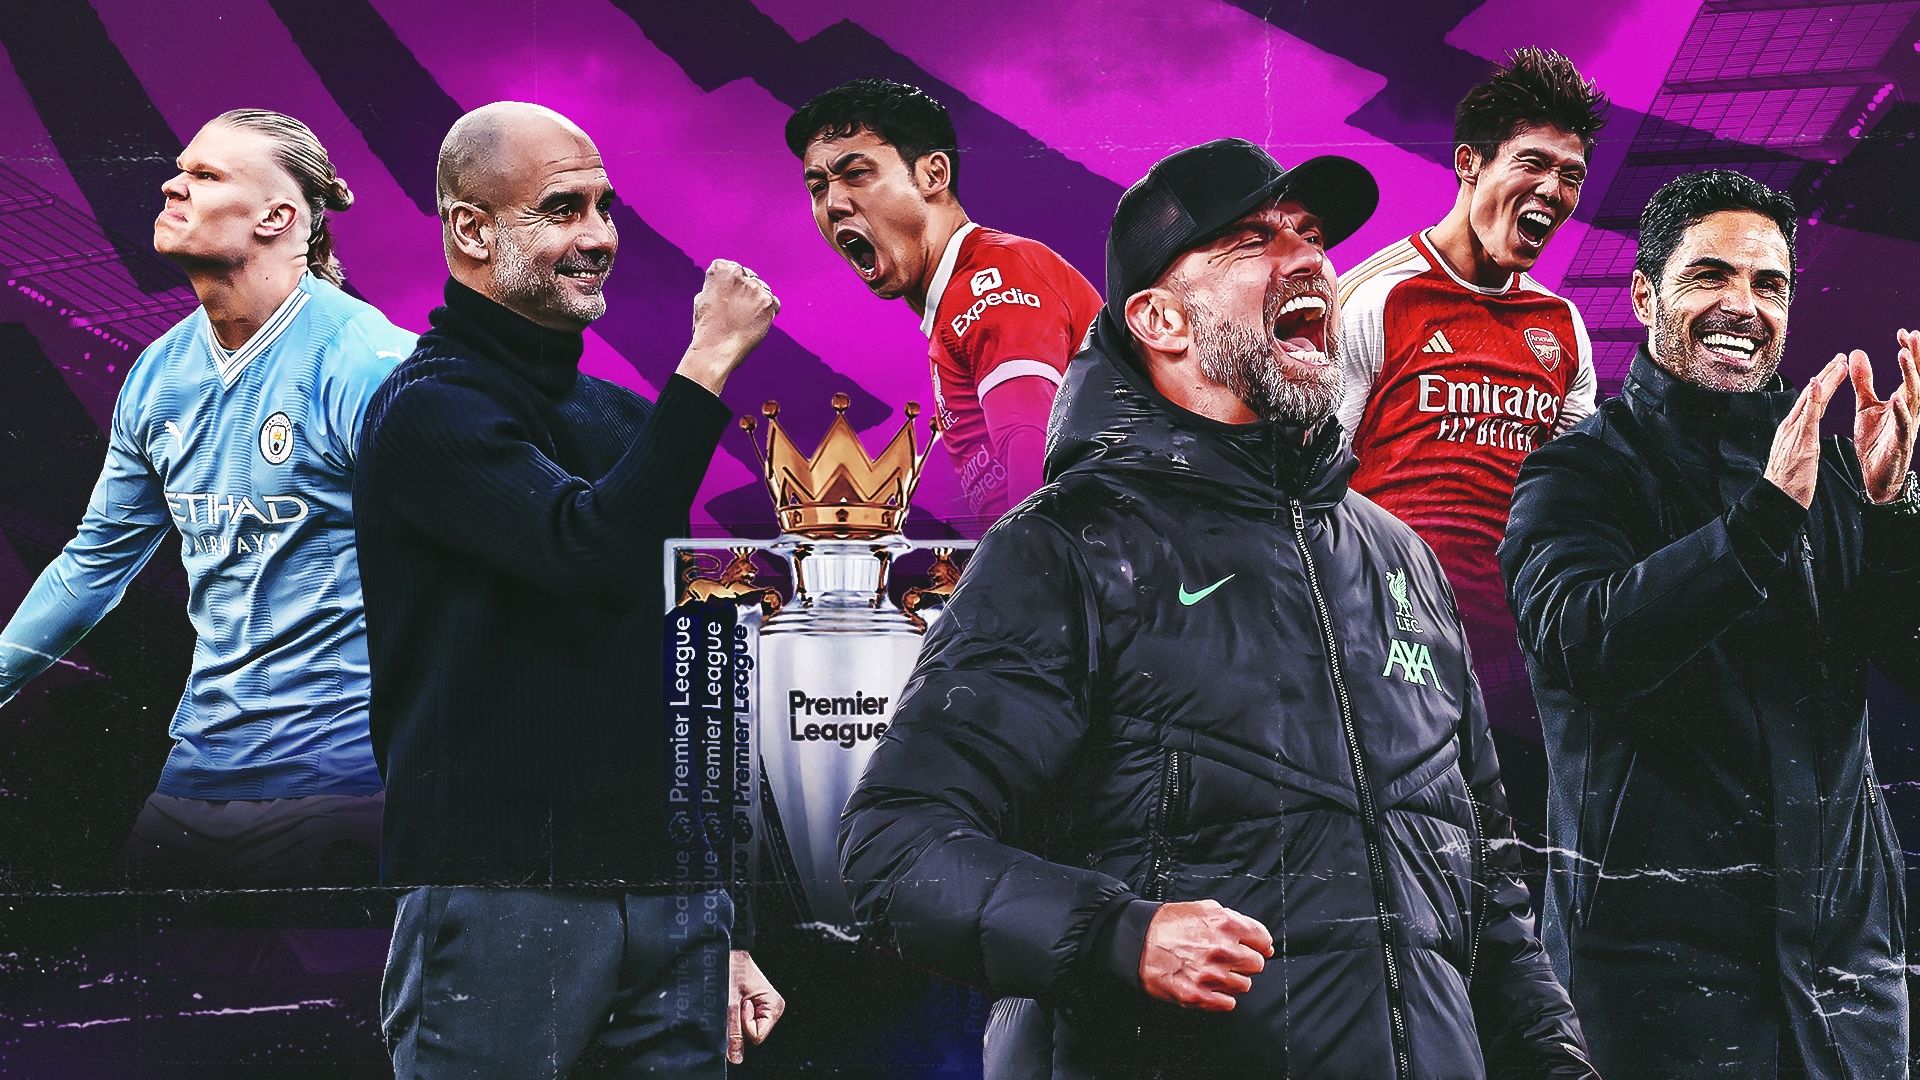 Eight reasons why the Premier League title race is far from over despite Man City overtaking Arsenal & Liverpool